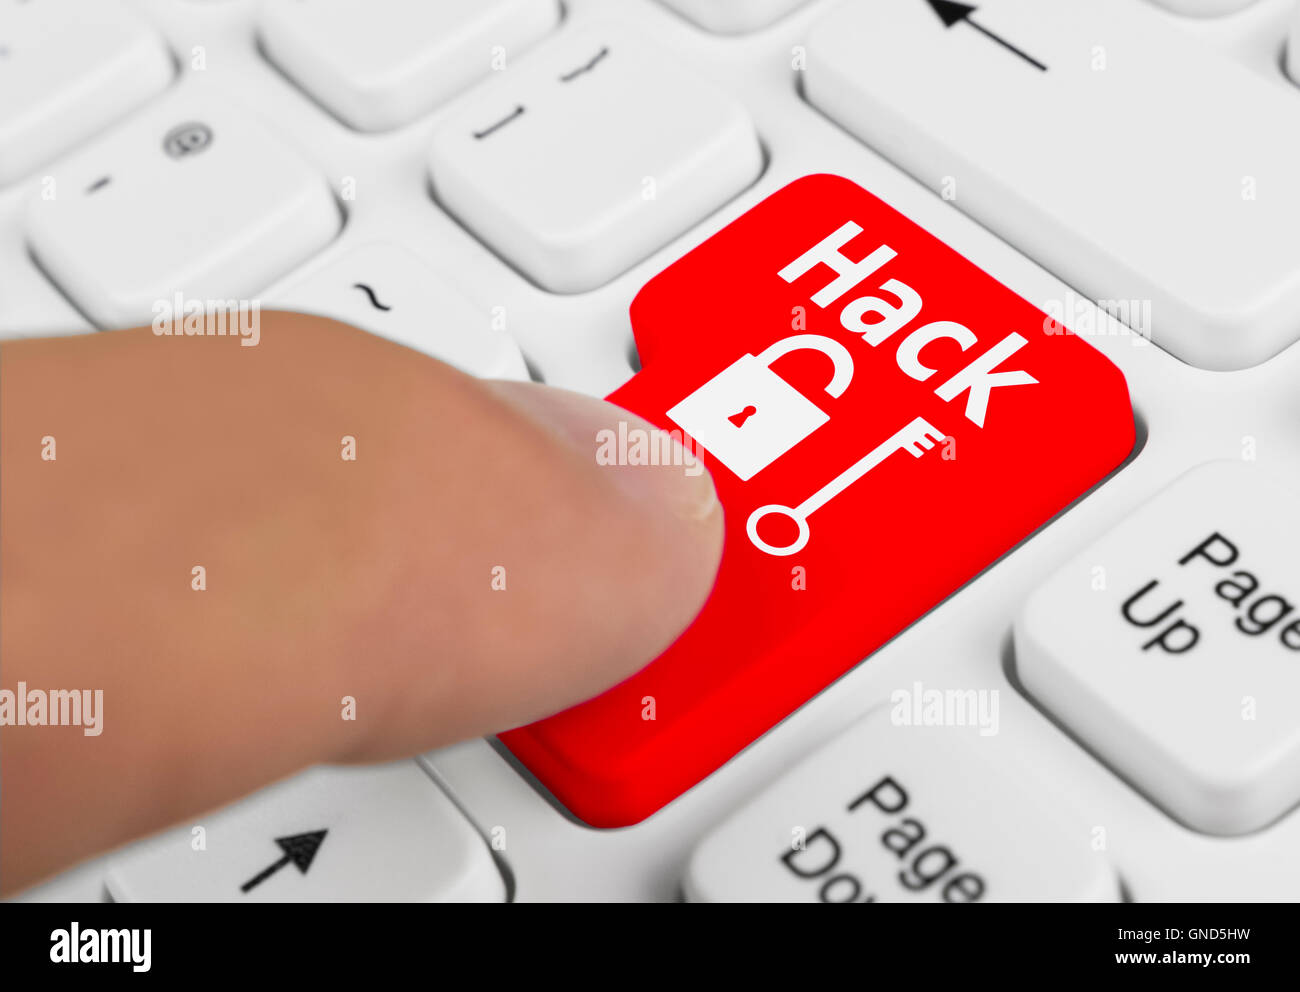 Computer hack button being pressed on a computer keyboard. Stock Photo